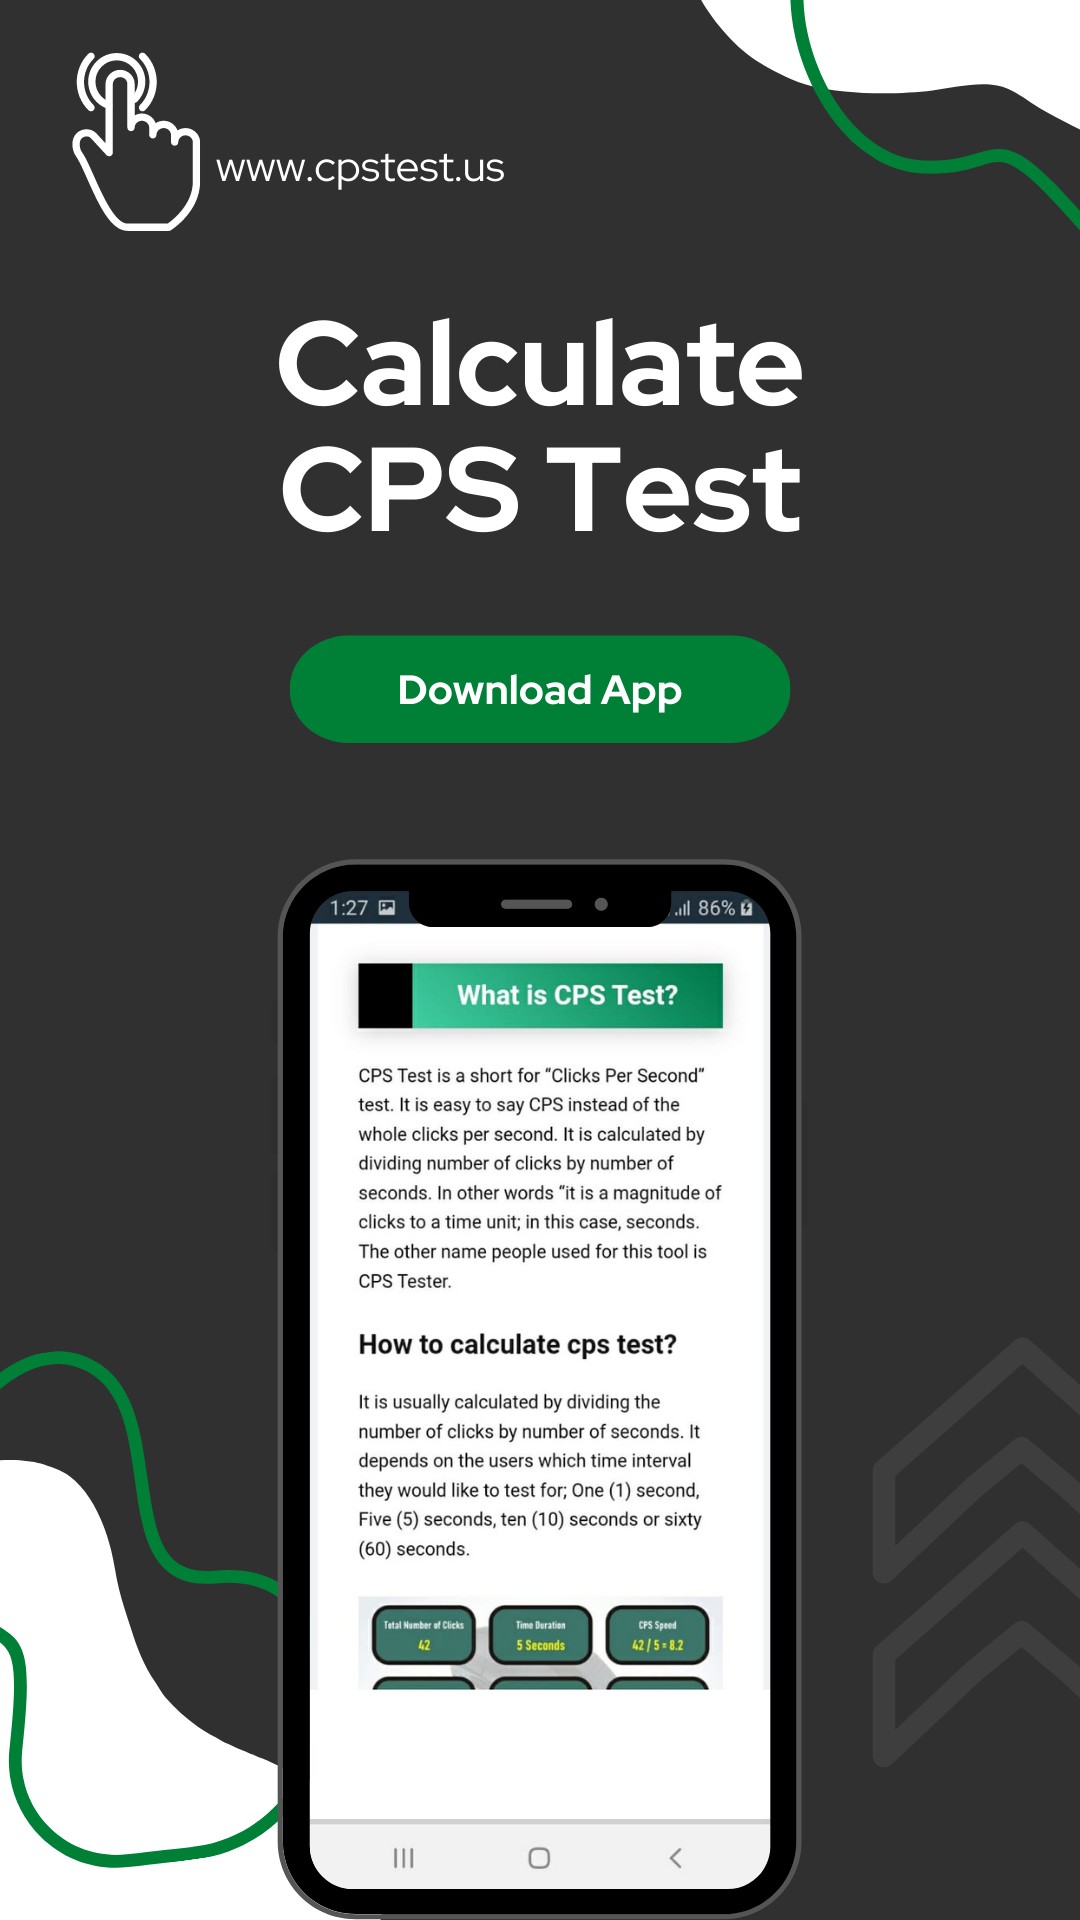 What is the best CPS Test to improve clicking? - Quora